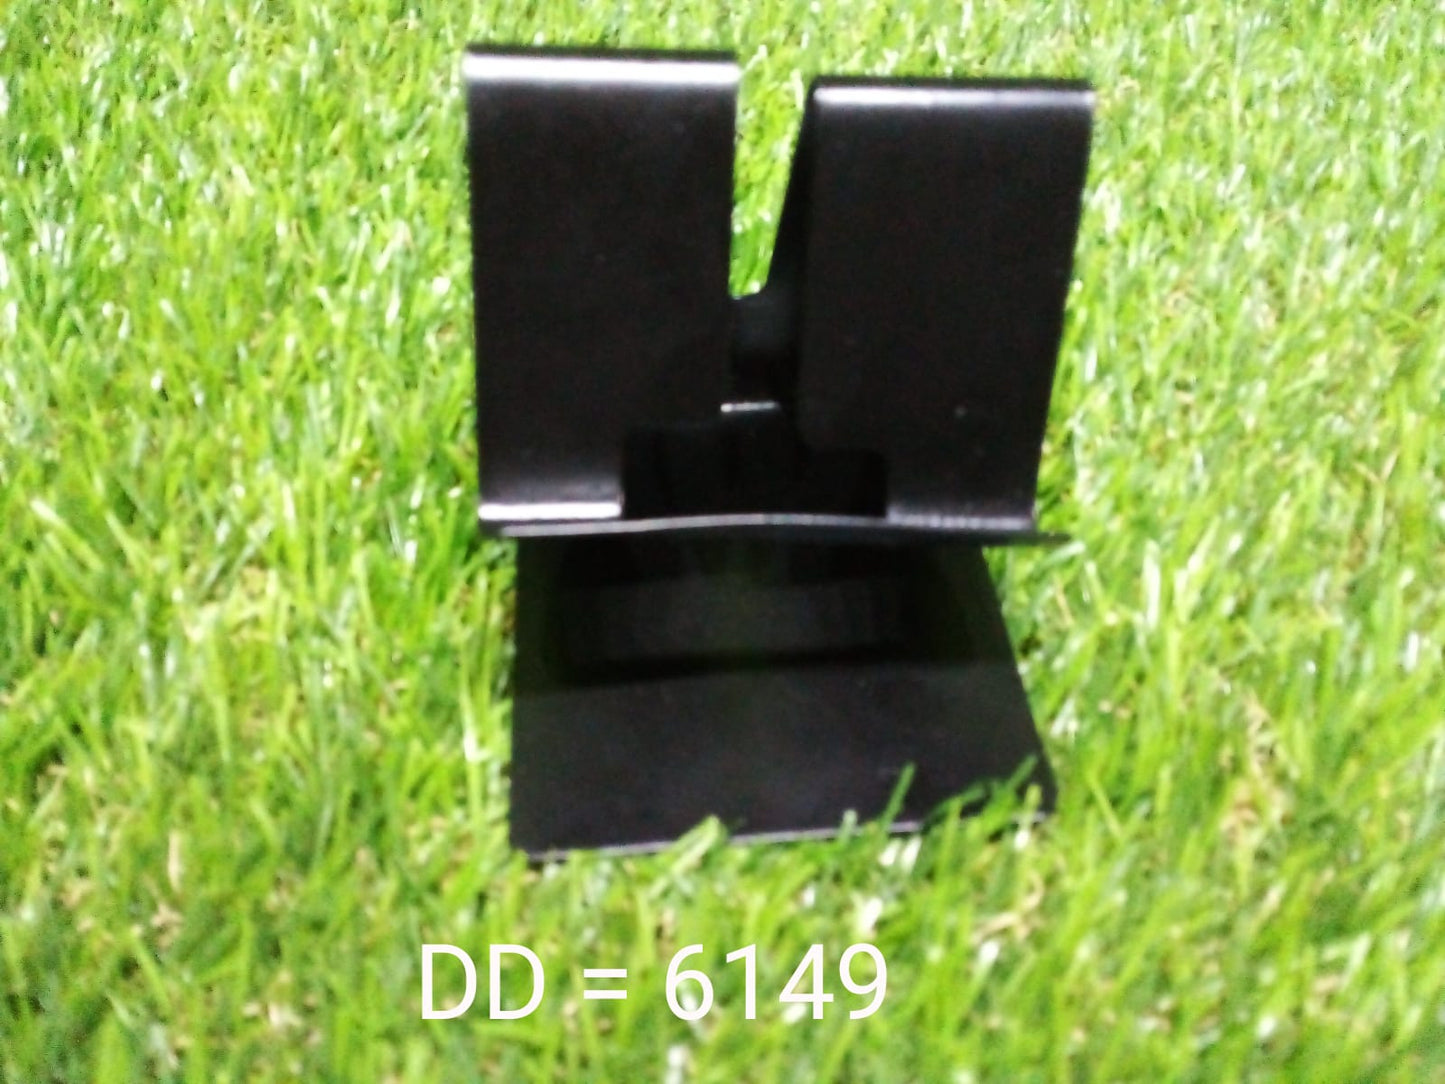 6149 Mobile Metal Stand widely used to give a stand and support for smartphones etc, at any place and any time purposes. DeoDap